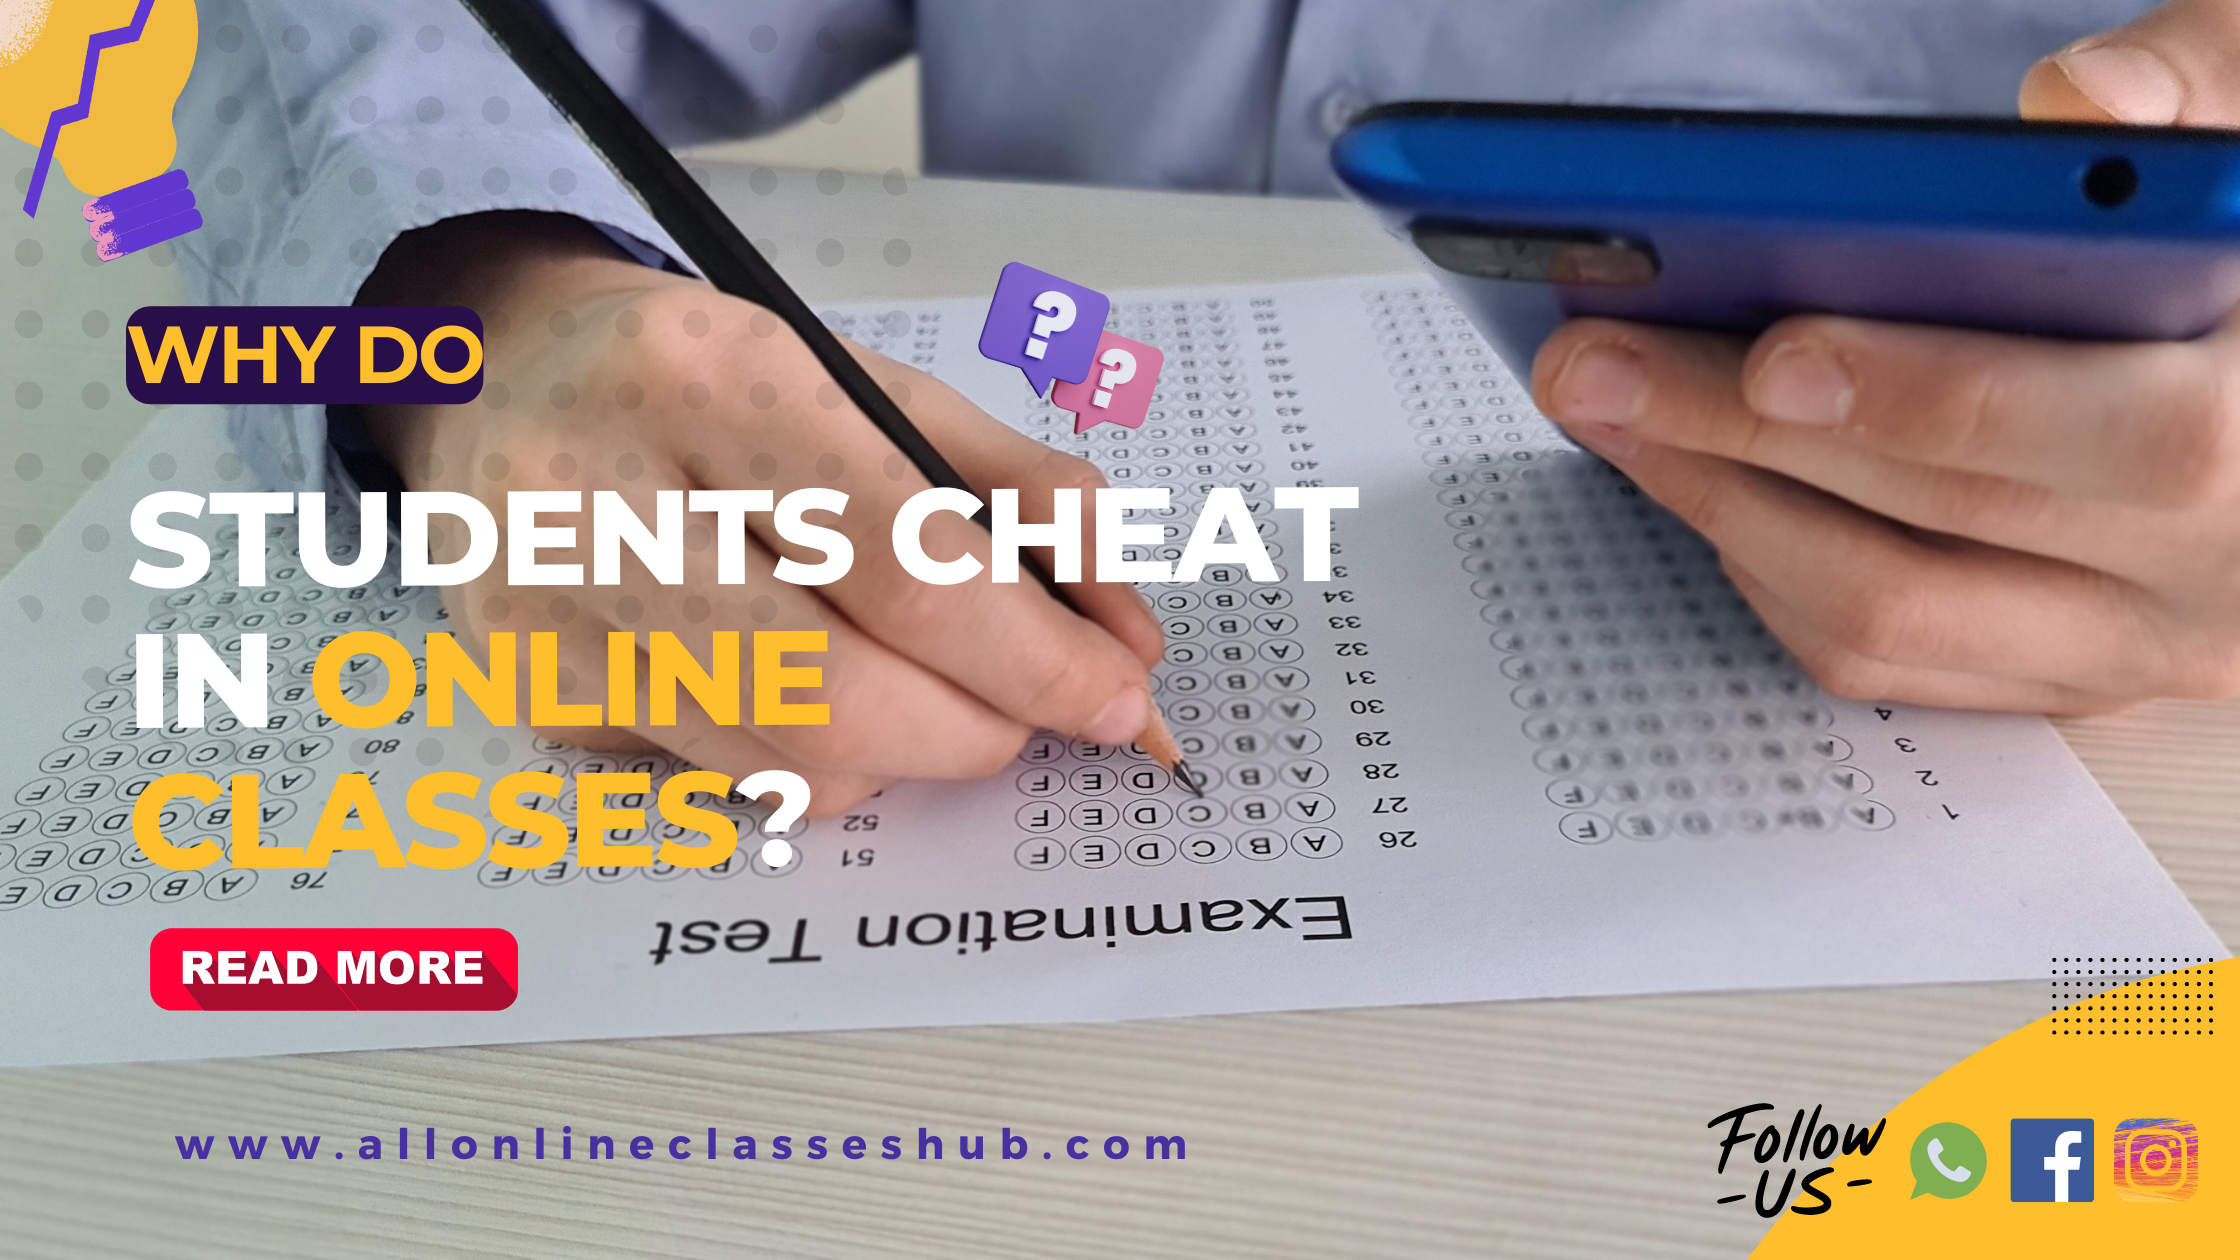 Why Do Students Cheat in Online Classes?